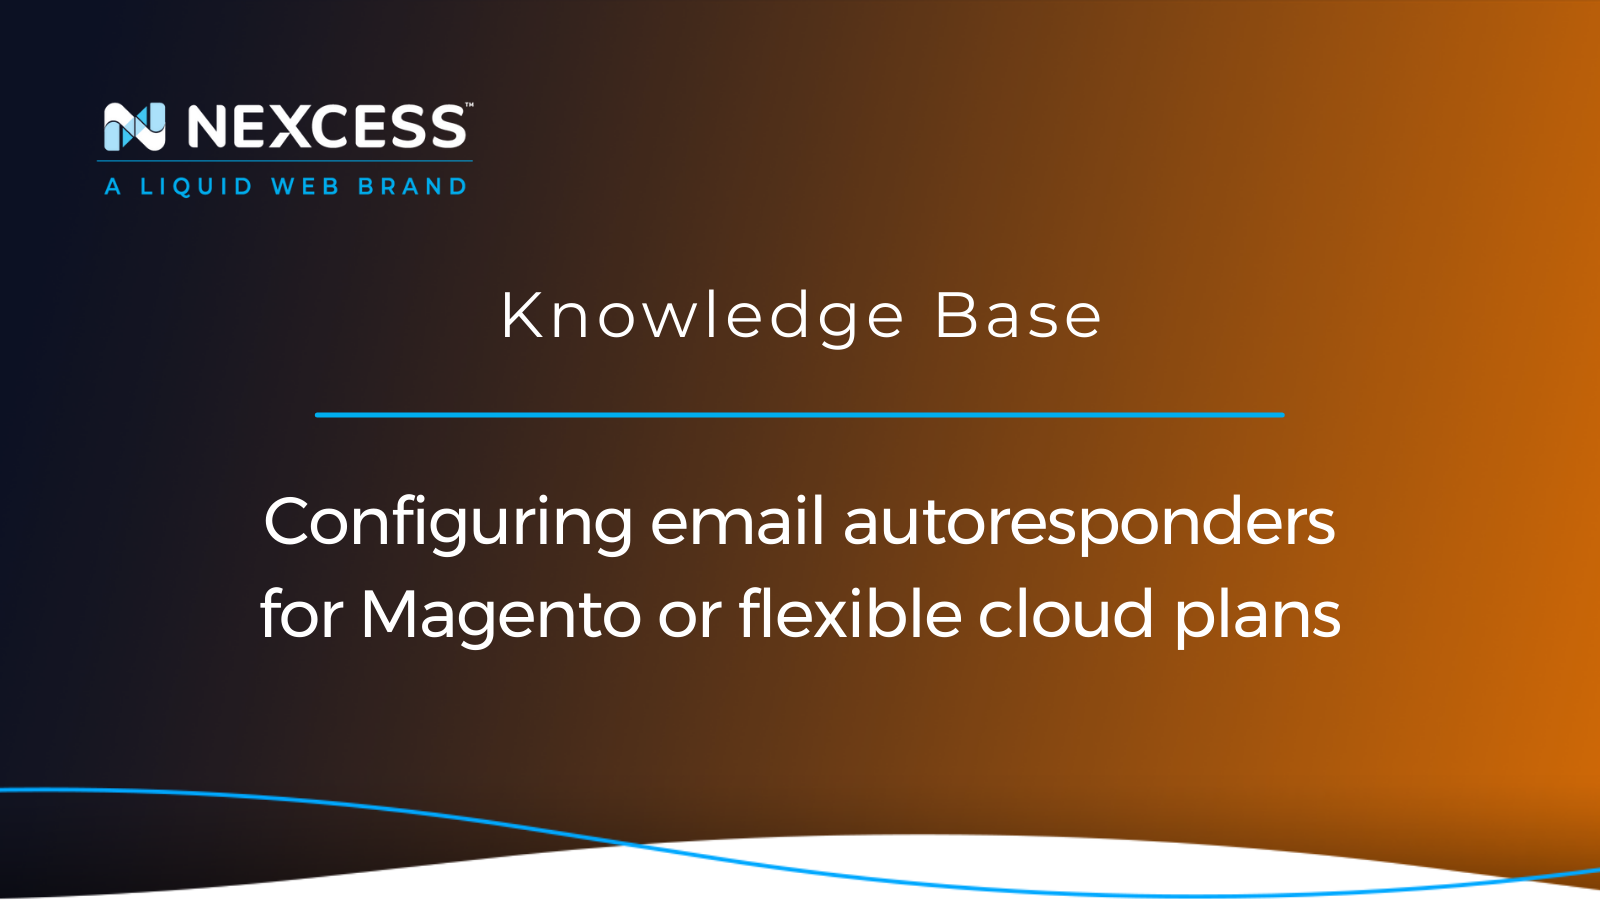 Configuring email autoresponders for Magento or flexible cloud plans